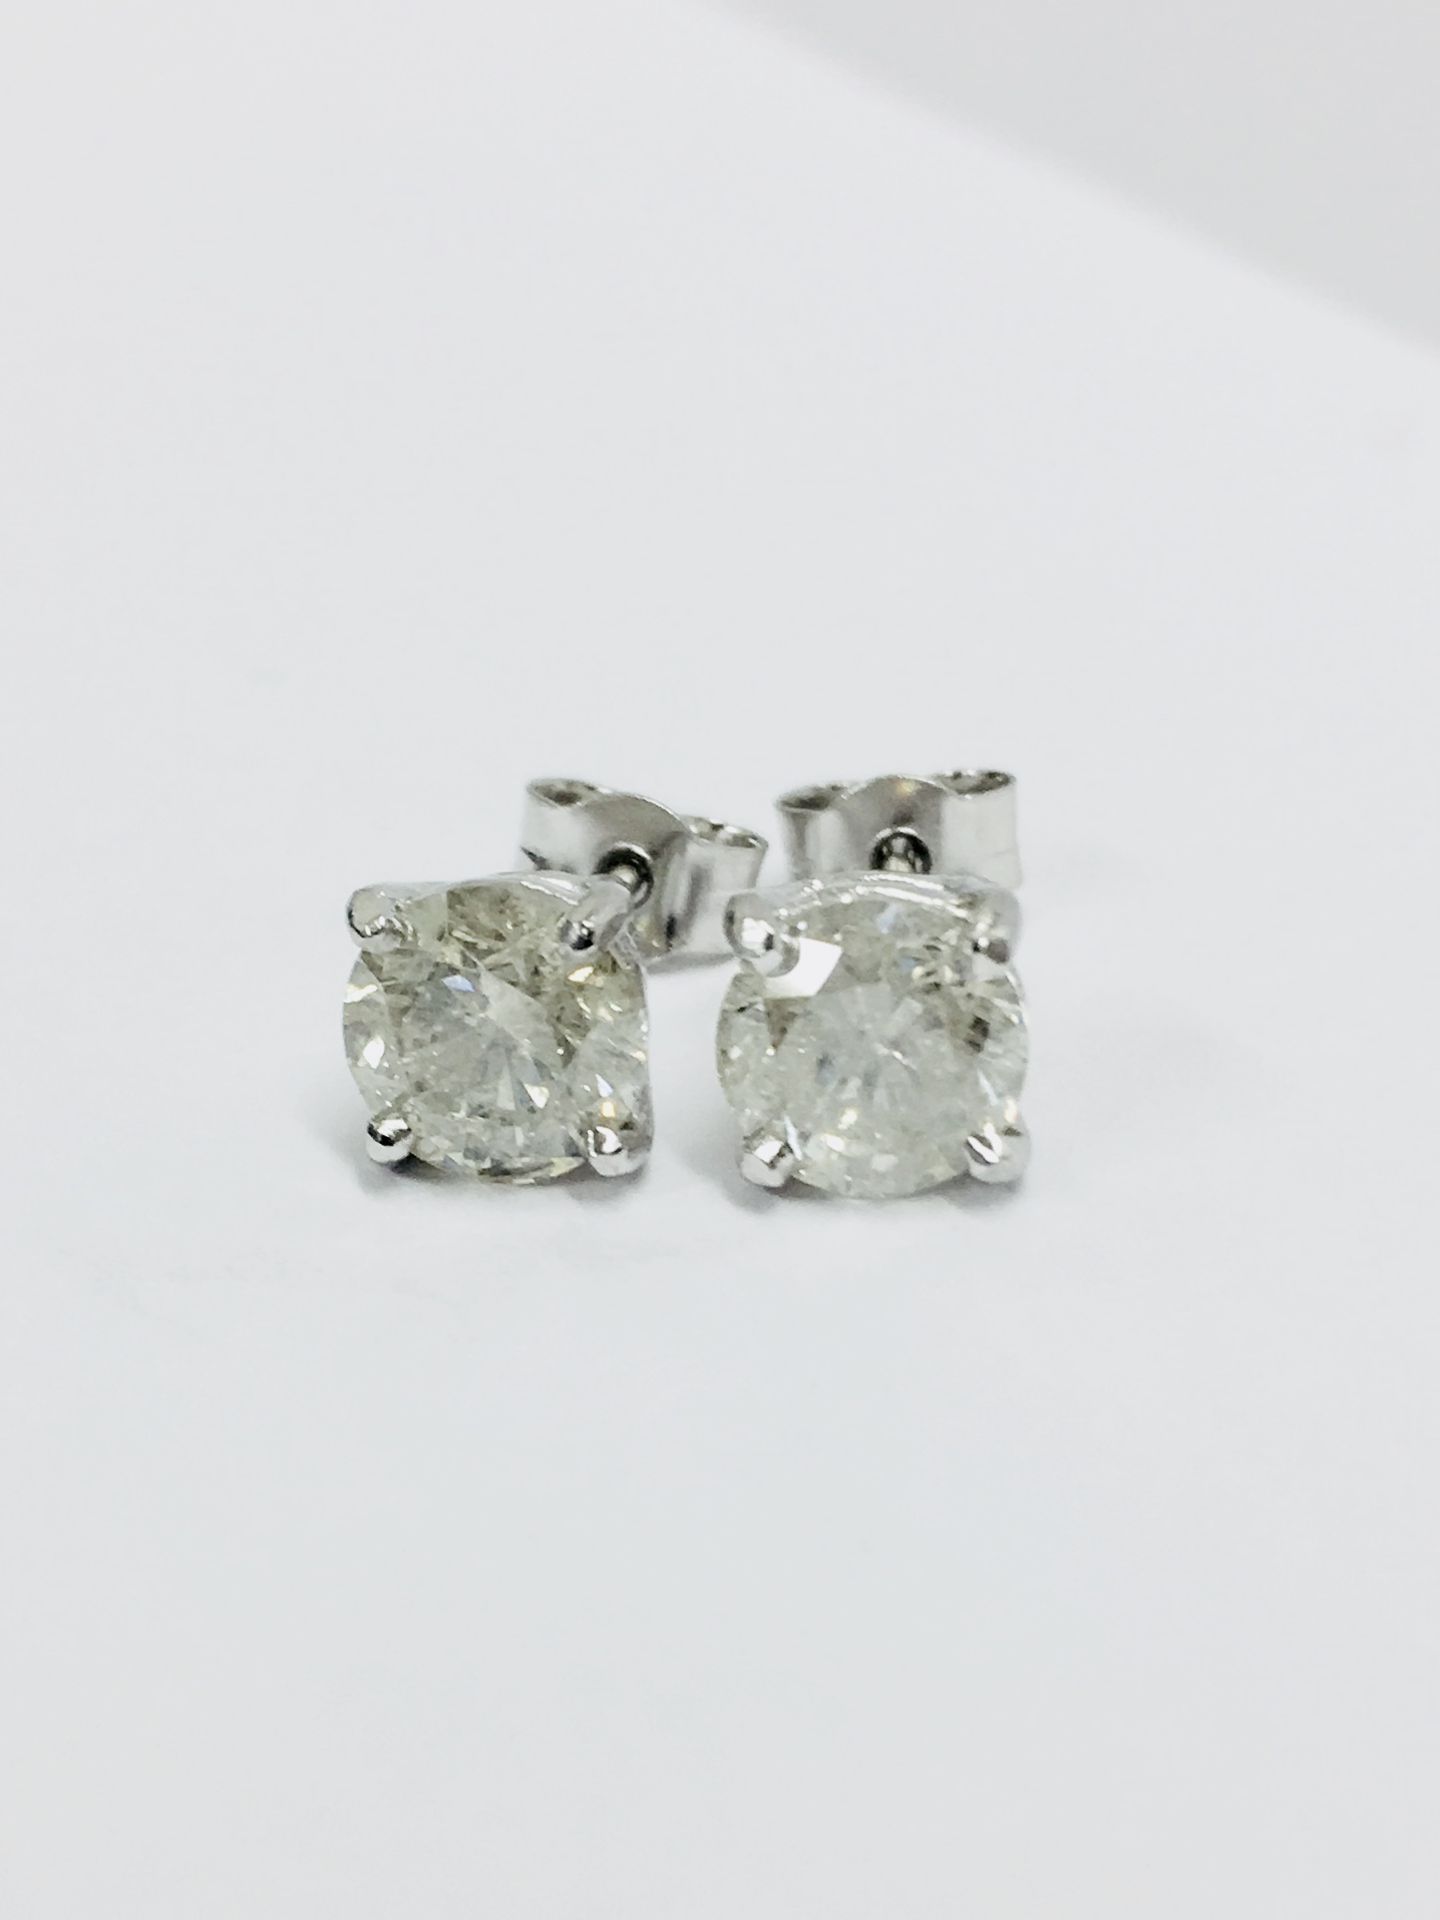 2.50ct Solitaire diamond stud earrings set with brilliant cut diamonds which have been enhanced. I